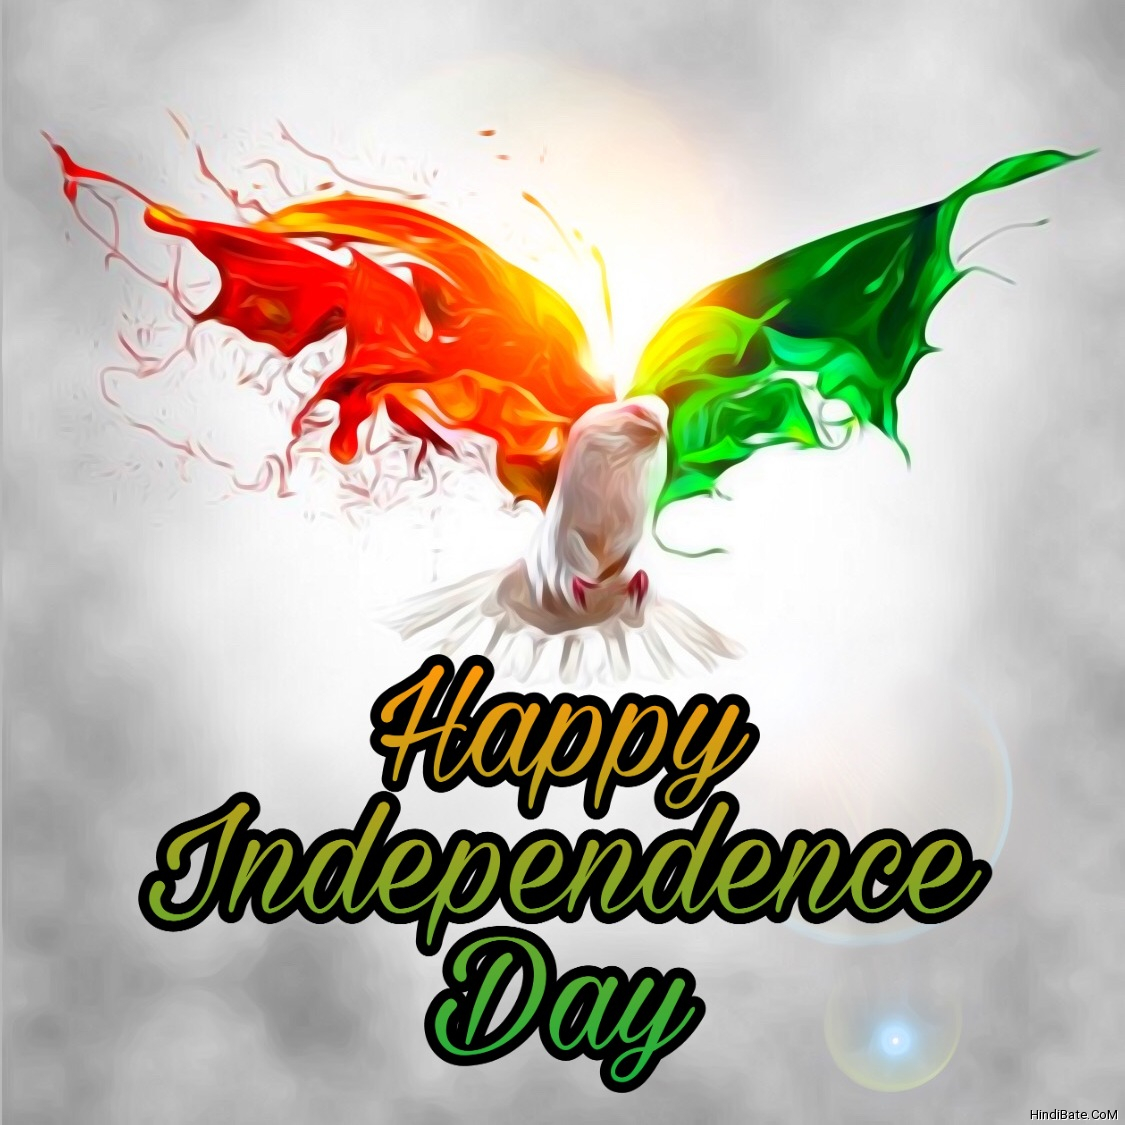 Happy Independence Day WhatsApp DP Latest 2020 - HindiBate.CoM